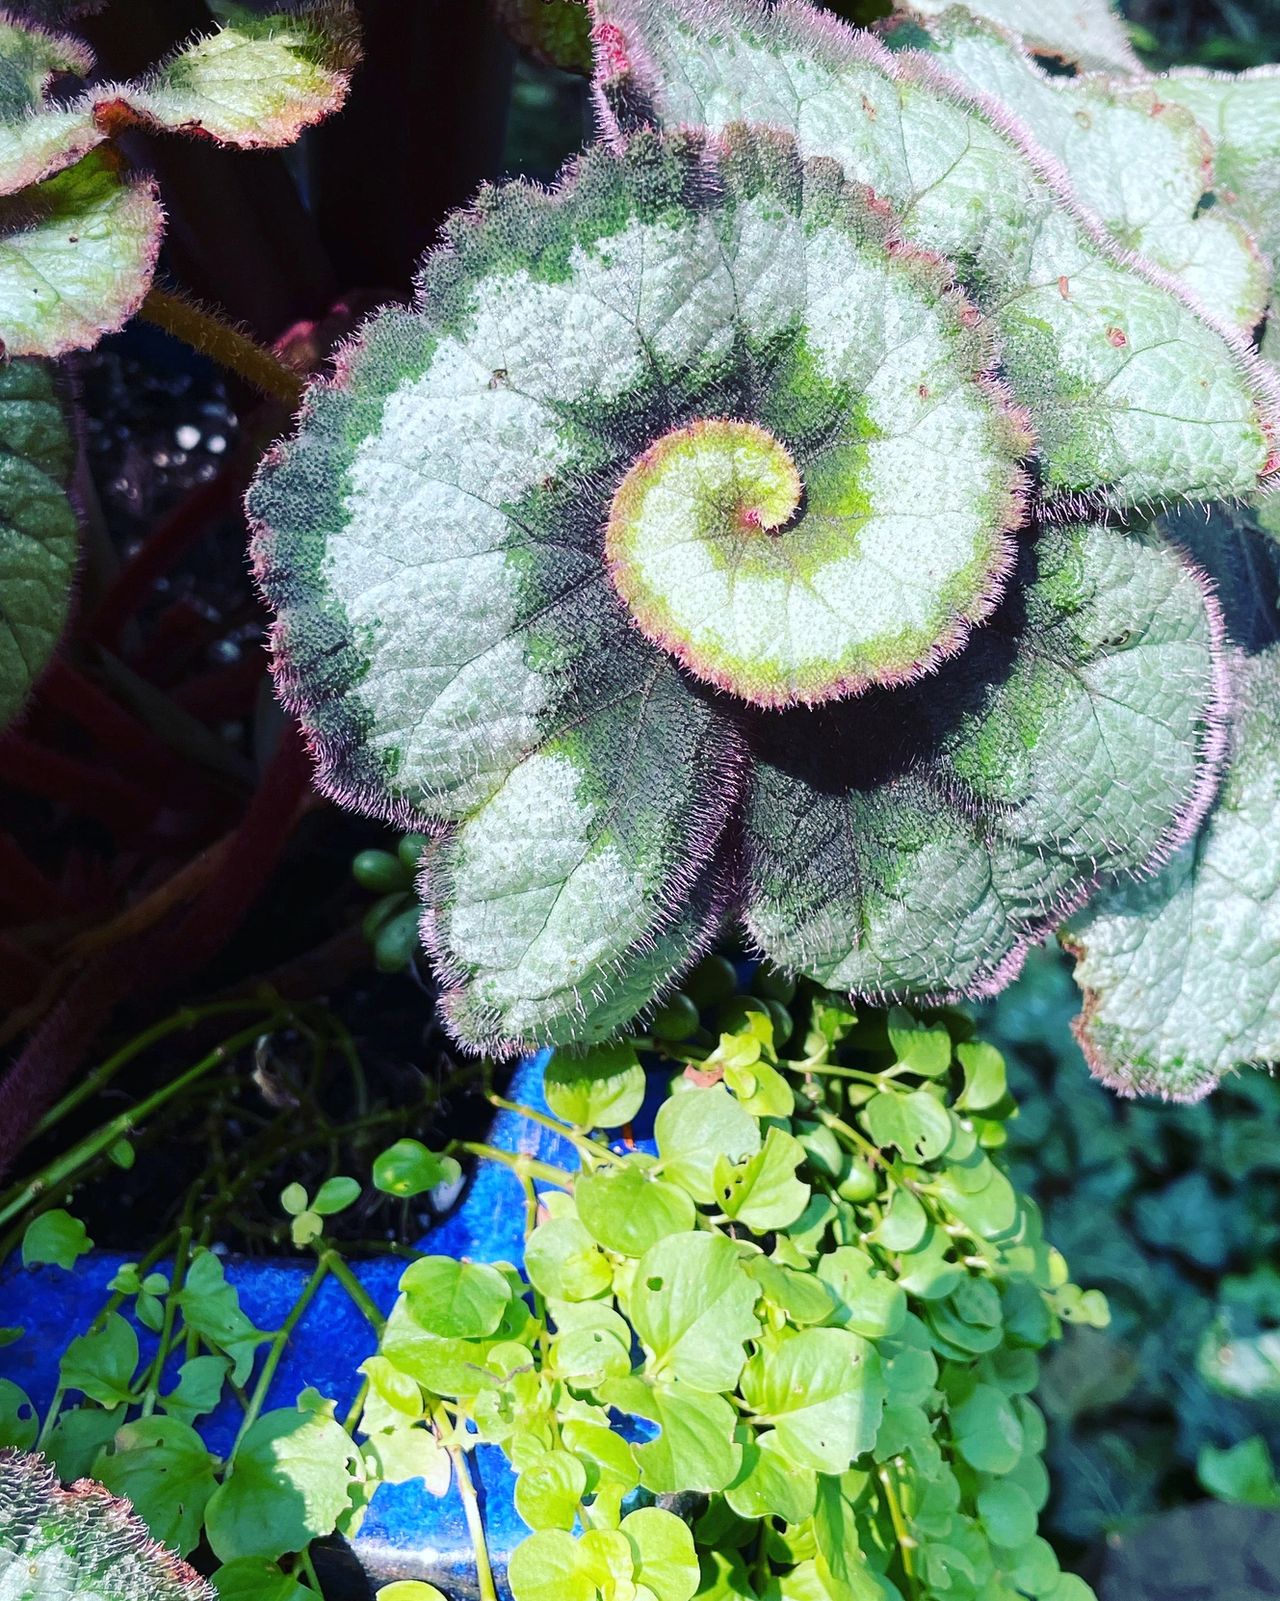 Begonia with a banded leaf that spirals into a tight curl at the center.